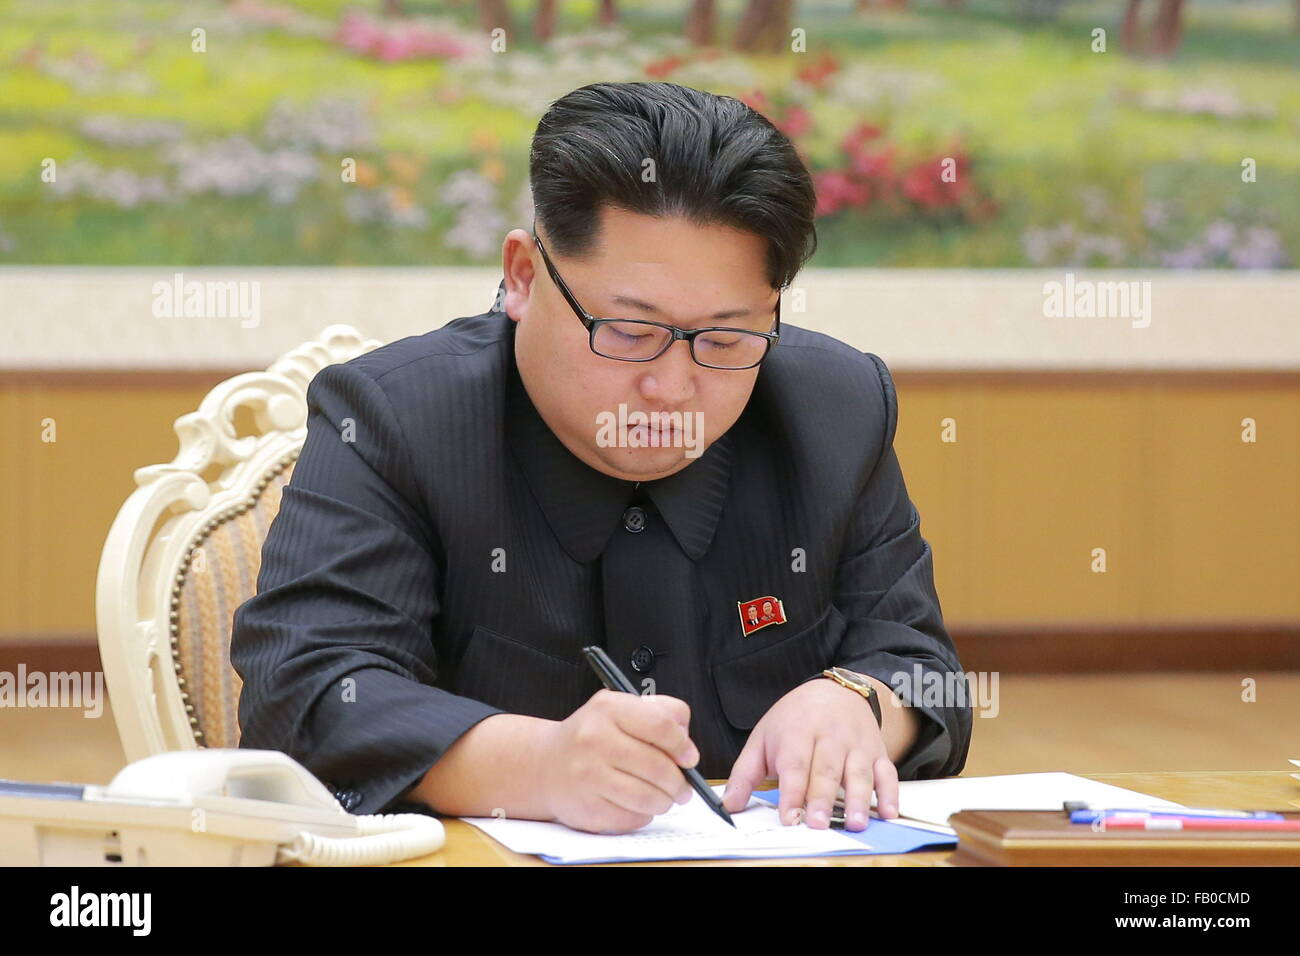 Pyongyang. 15th Dec, 2015. Photo provided by the Korean Central News Agency (KCNA) on Jan. 7, 2016 shows top leader of the Democratic People's Republic of Korea (DPRK) Kim Jong Un signing the final written order of the hydrogen bomb test on Jan. 3, 2016. Kim Jong Un ordered the H-bomb test on Dec. 15, 2015, and signed the final written order on Sunday. © KCNA/Xinhua/Alamy Live News Stock Photo